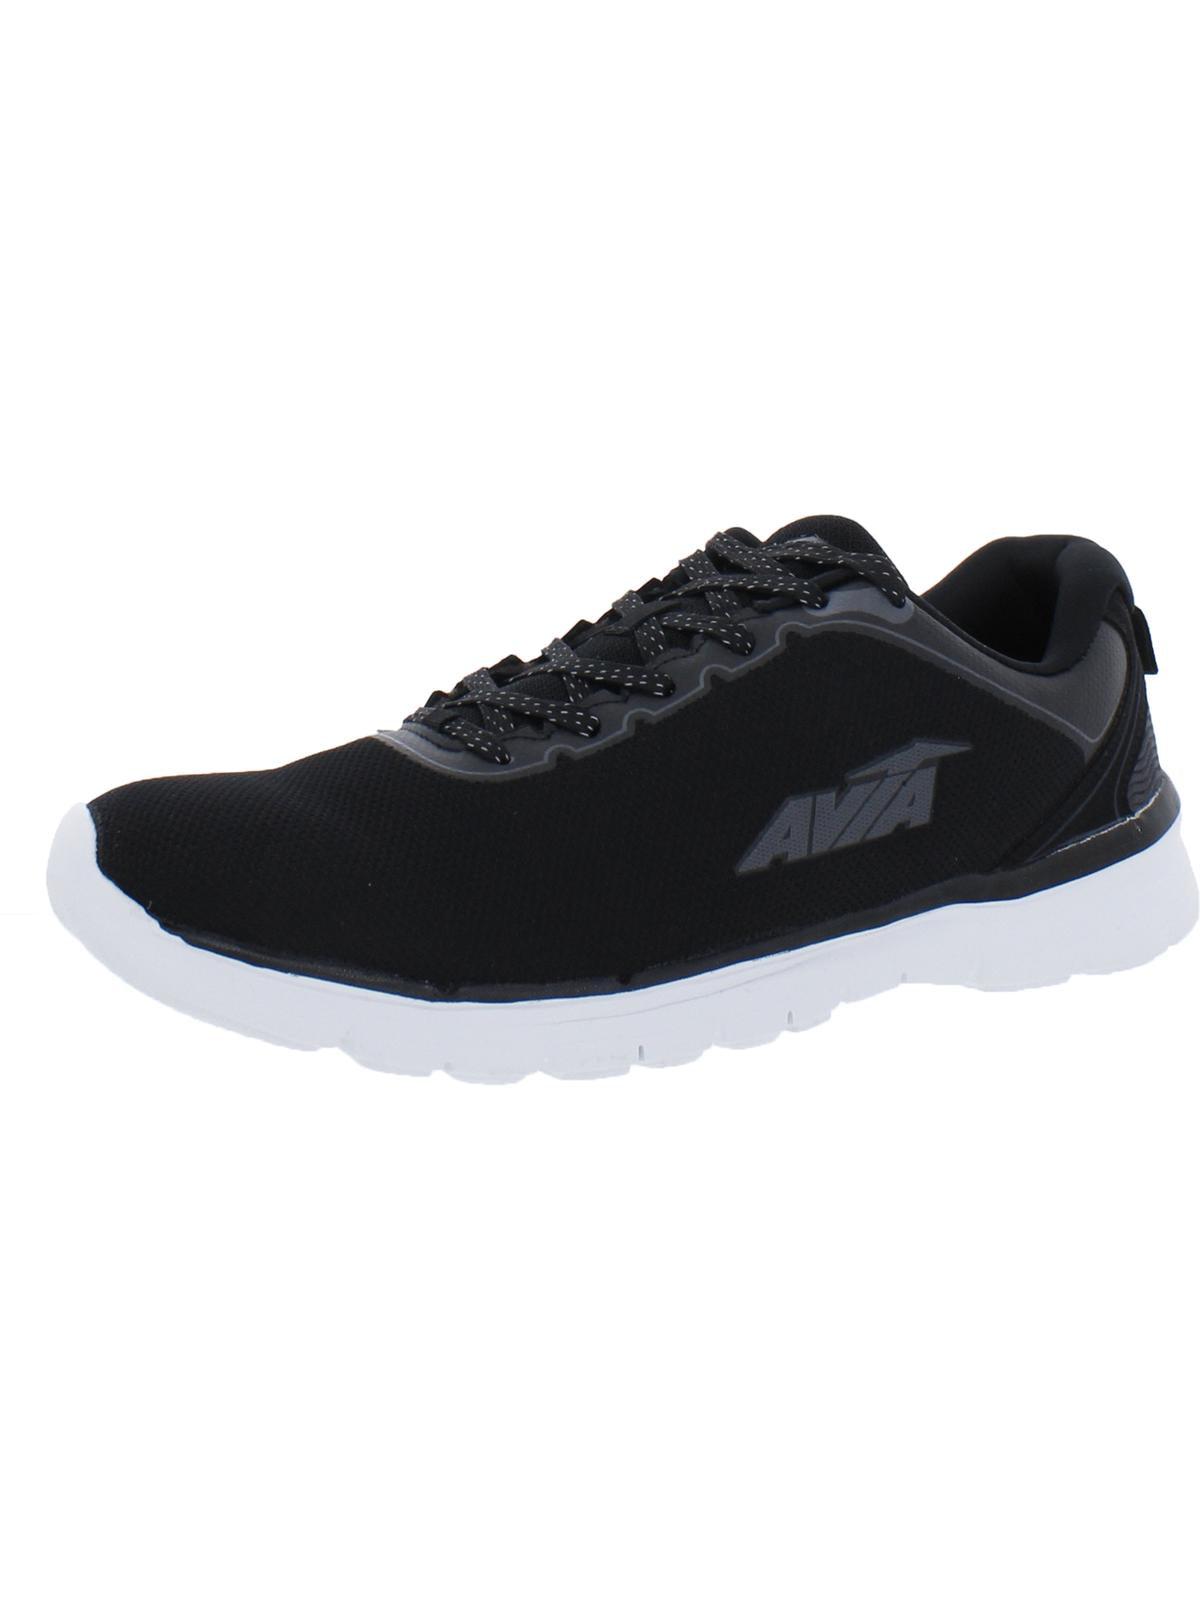 Avia Avi-factor 2.0 Memory Foam Running Athletic And Training Shoes in ...